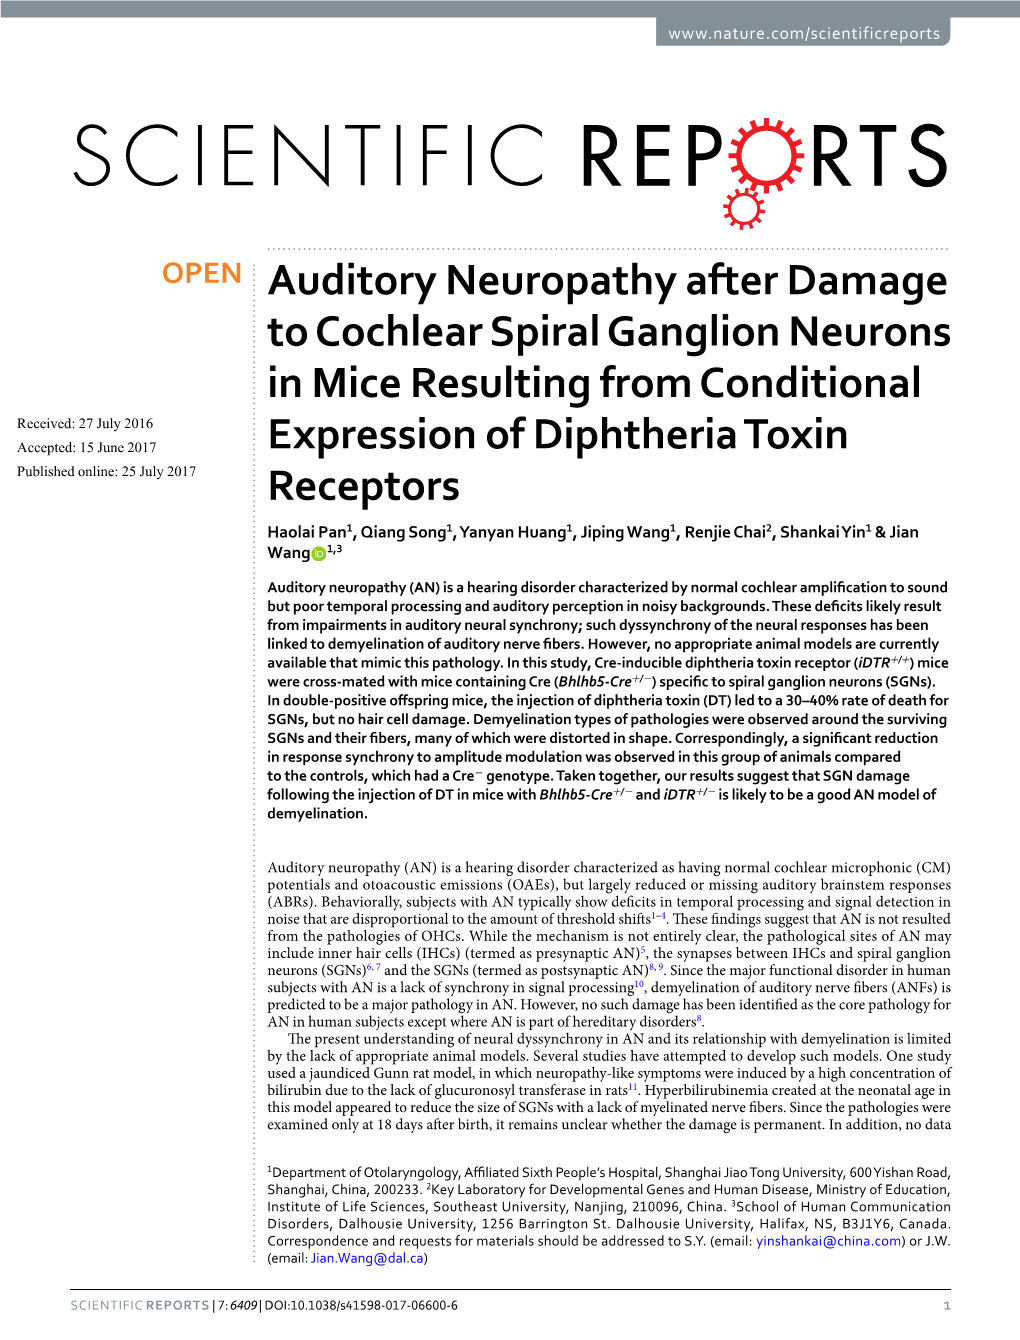 Auditory Neuropathy After Damage to Cochlear Spiral Ganglion Neurons